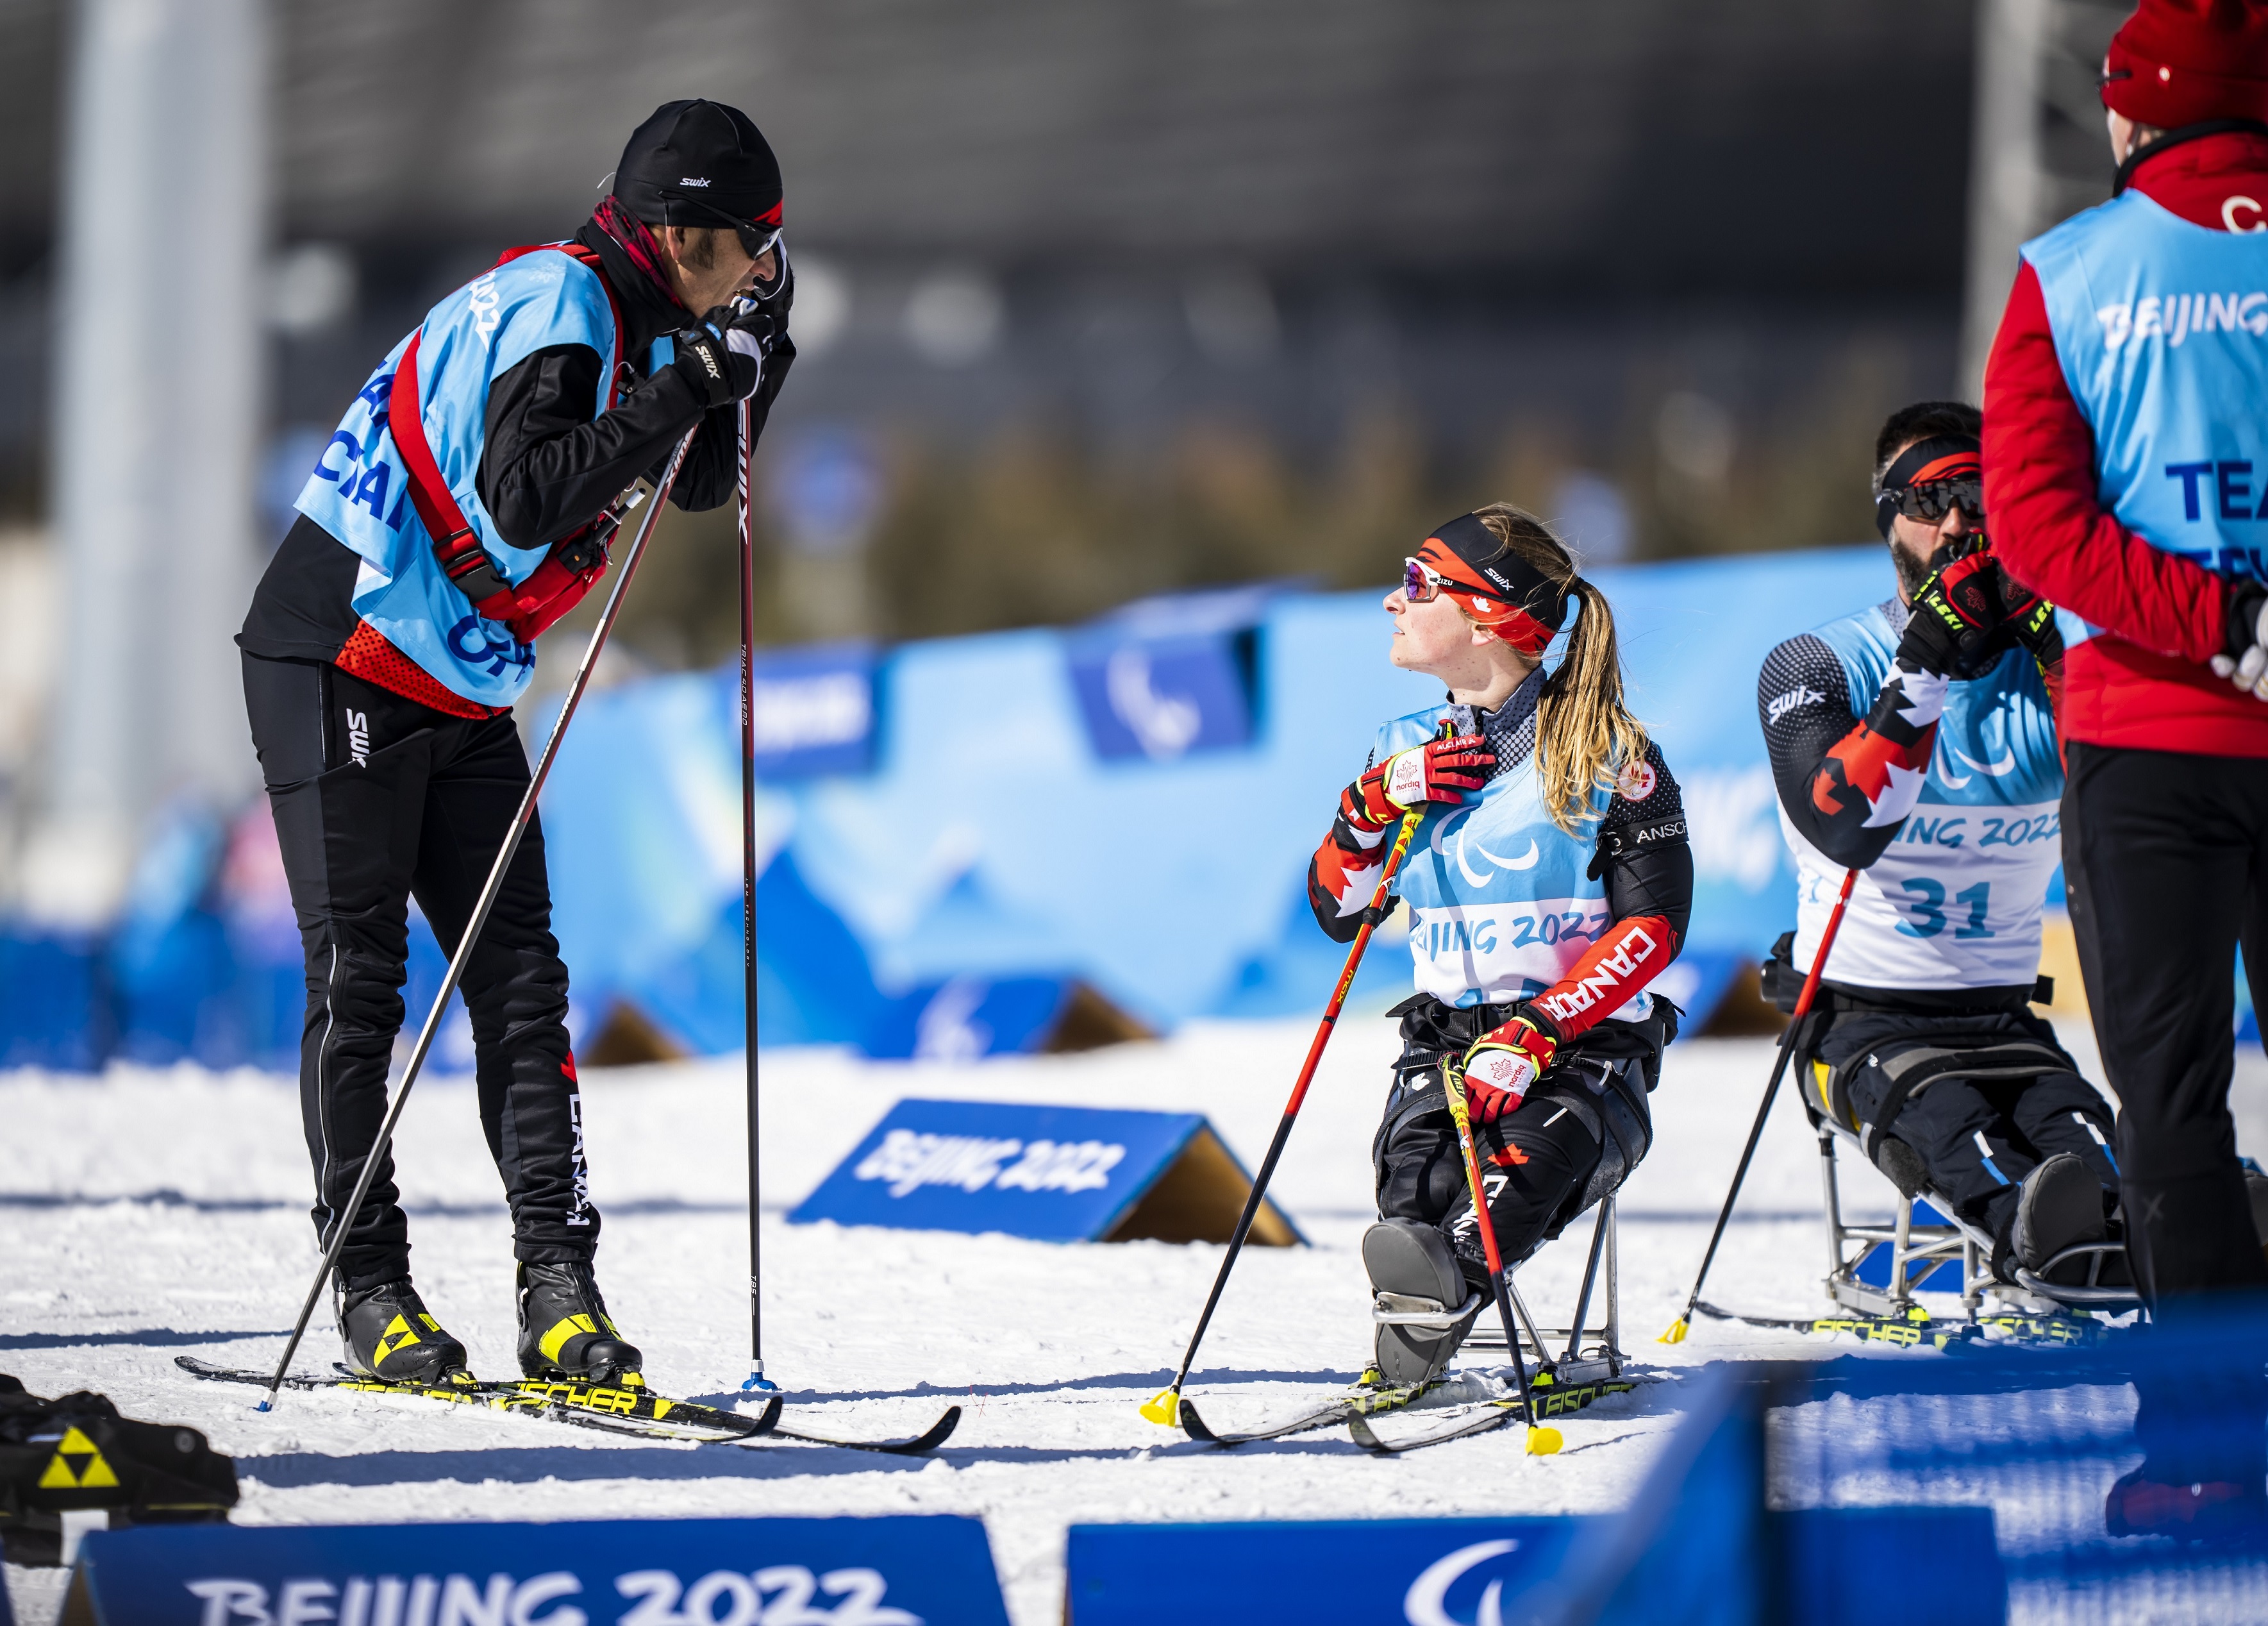 Coach Robin McKeever chats with Para nordic skier Christina Picton during training at the Beijing 2022 Paralympic Winter Games